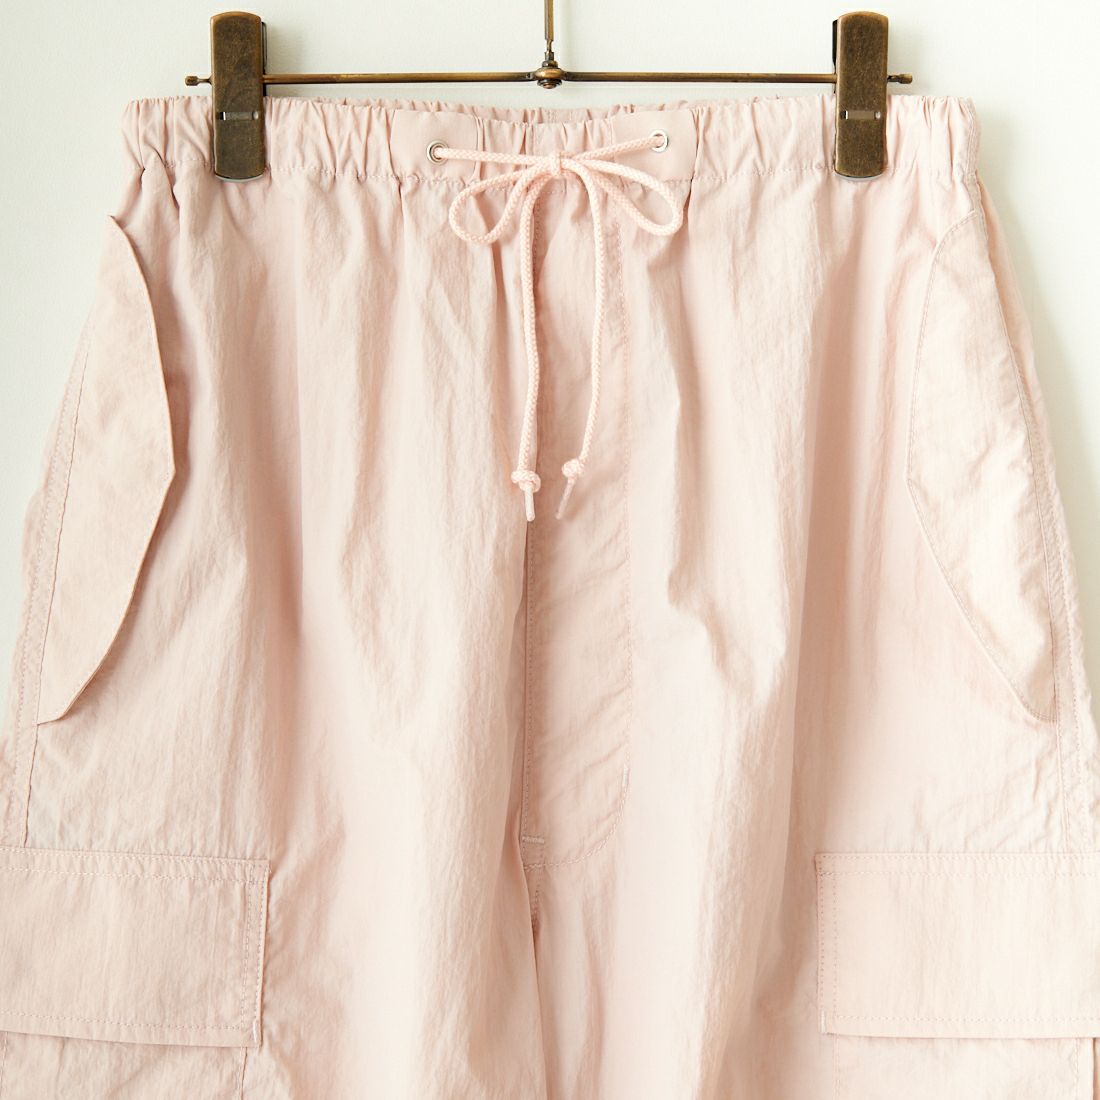 Jeans Factory Clothes [ジーンズファクトリークローズ] ナイロンバルーンカーゴパンツ [IN8-PT-4] PINK